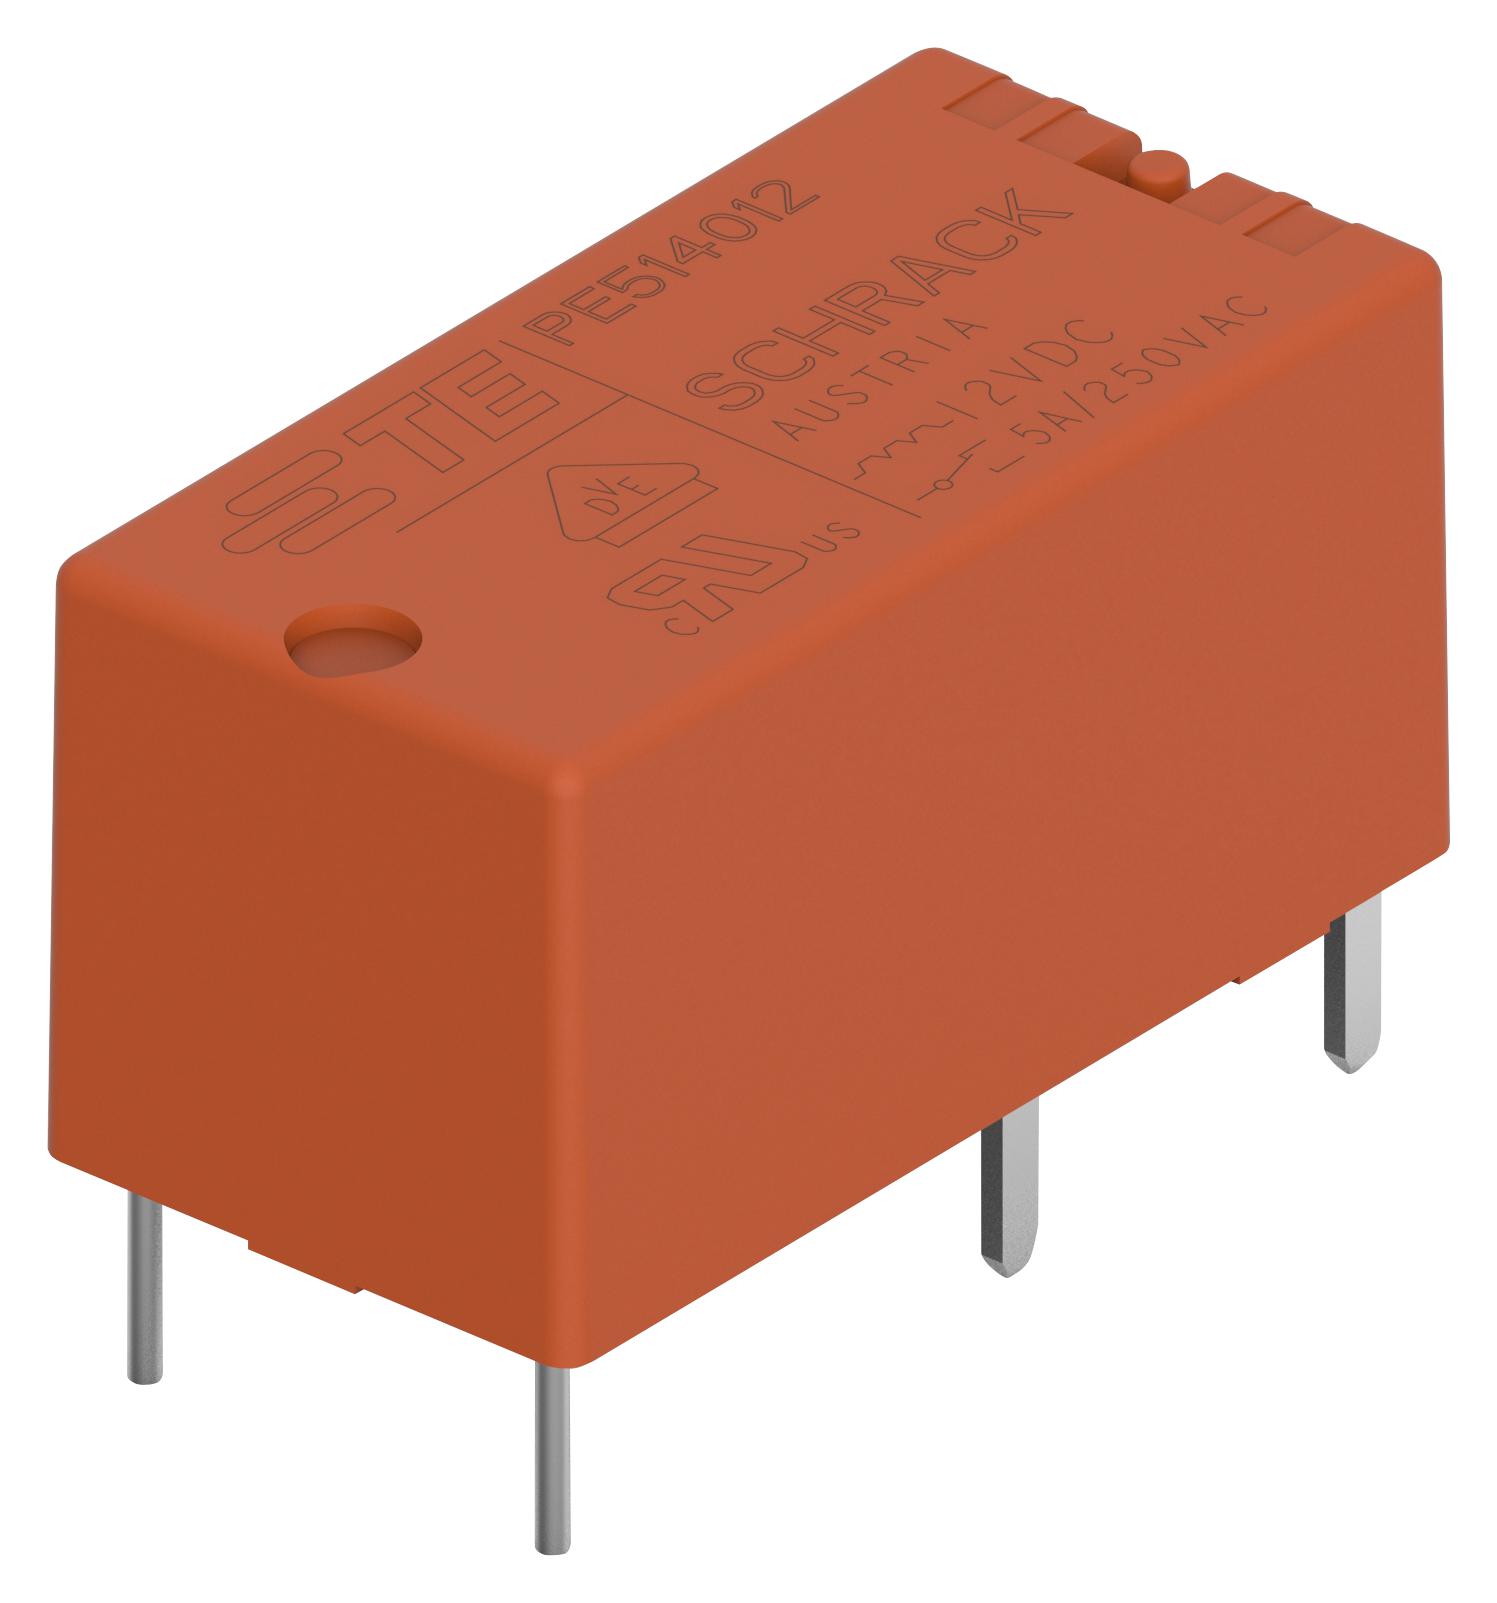 2-1393219-0 POWER RELAY, SPDT, 5A, 250V, PCB SCHRACK - TE CONNECTIVITY